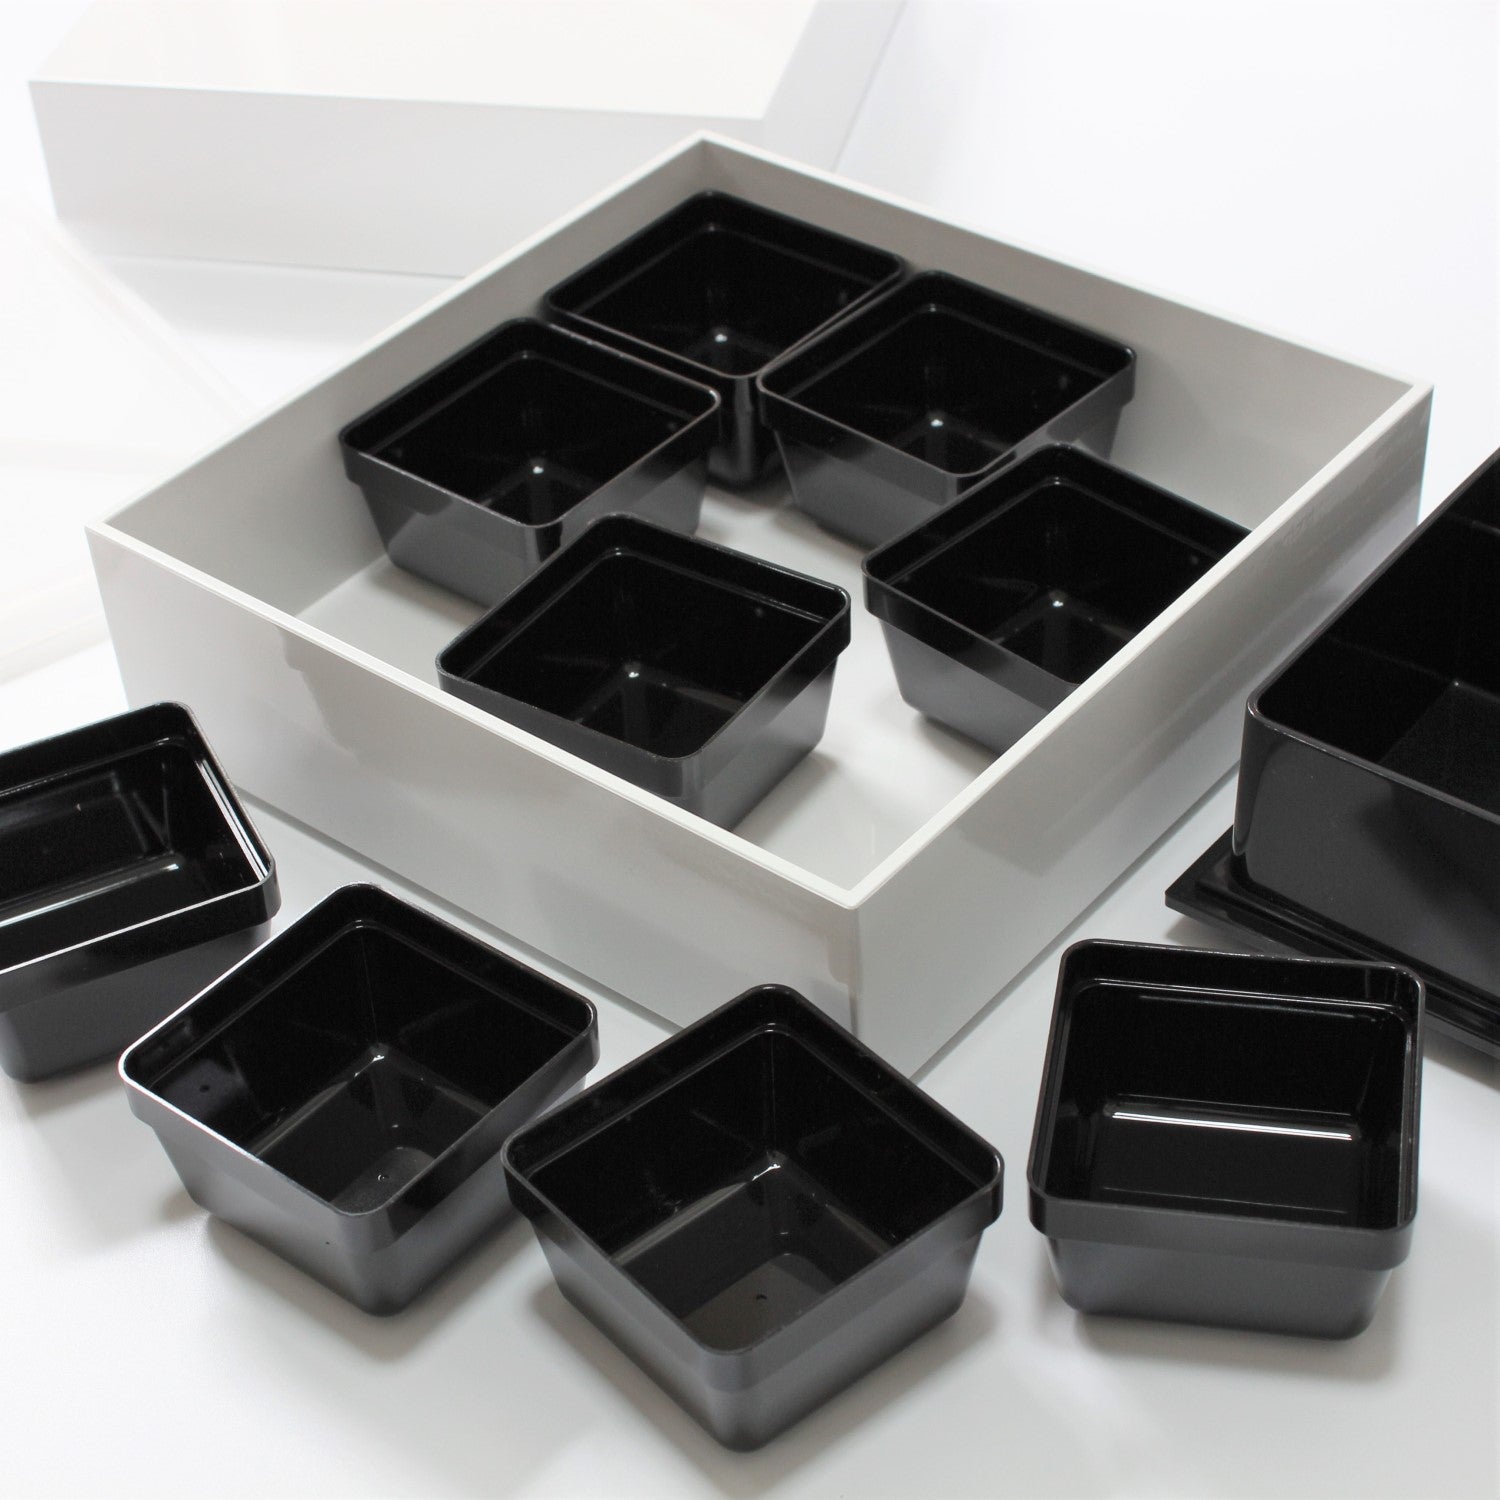 This picnic bento box contains 9 small square containers which can hold bite sized snacks